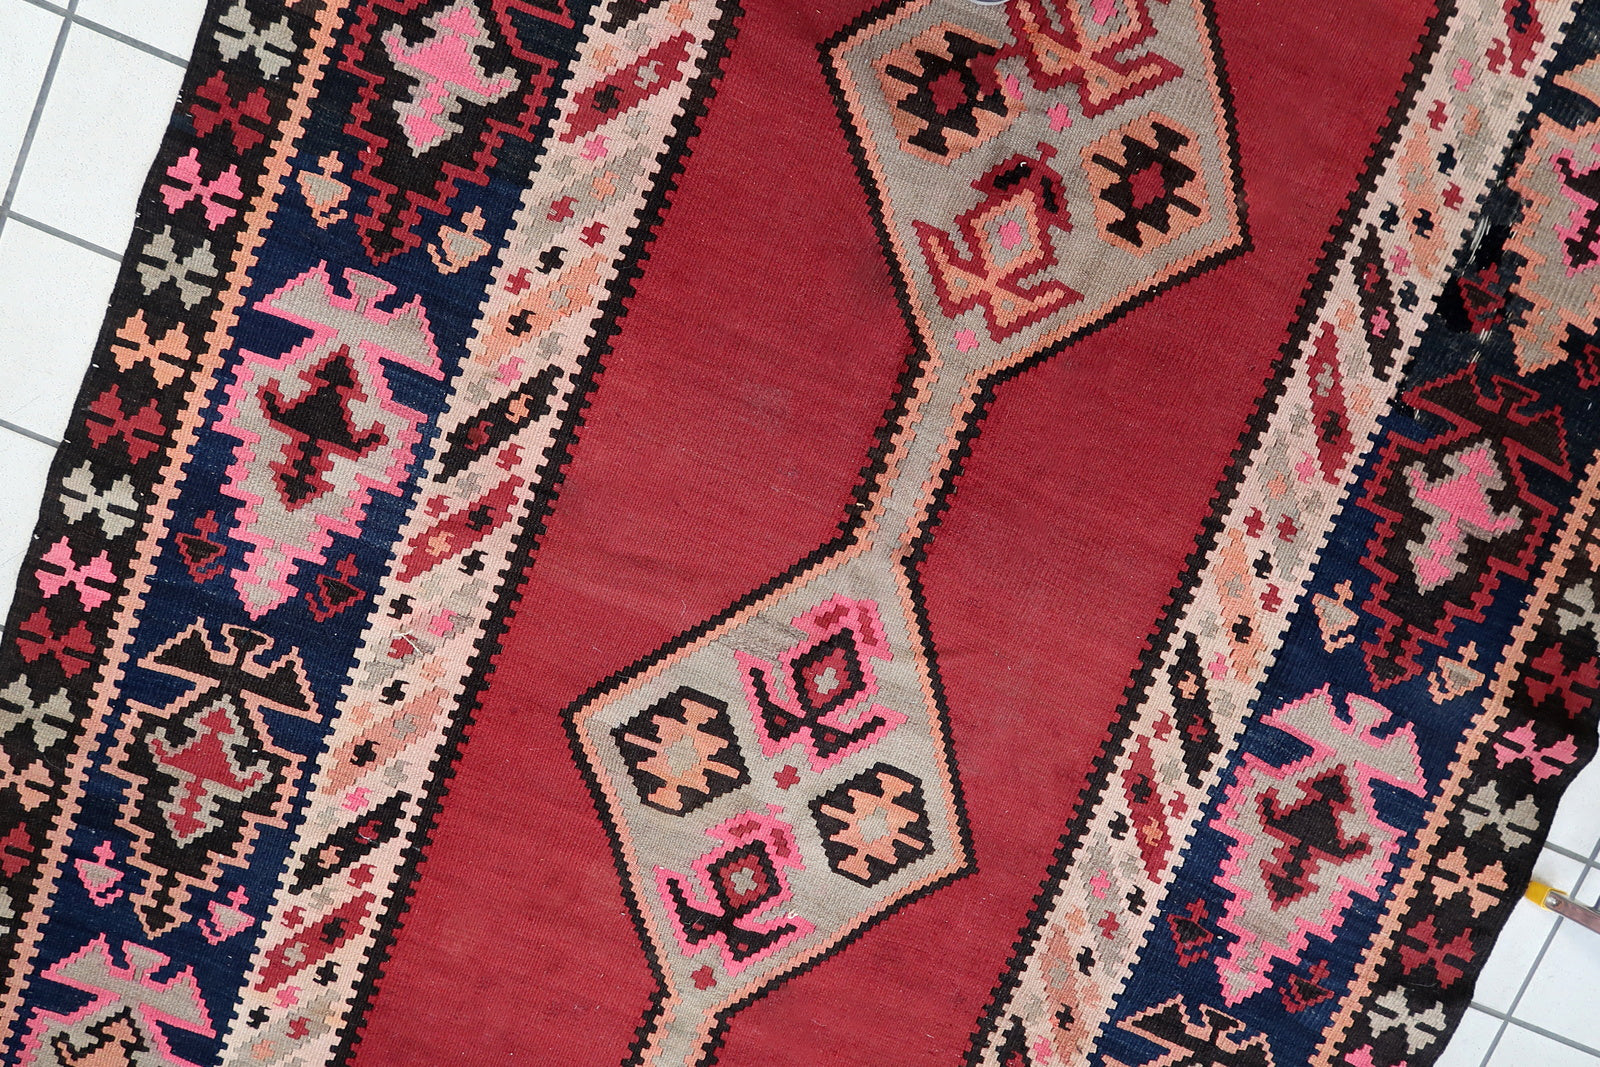 Vibrant Patterns in Red and Brown on Vintage Kilim